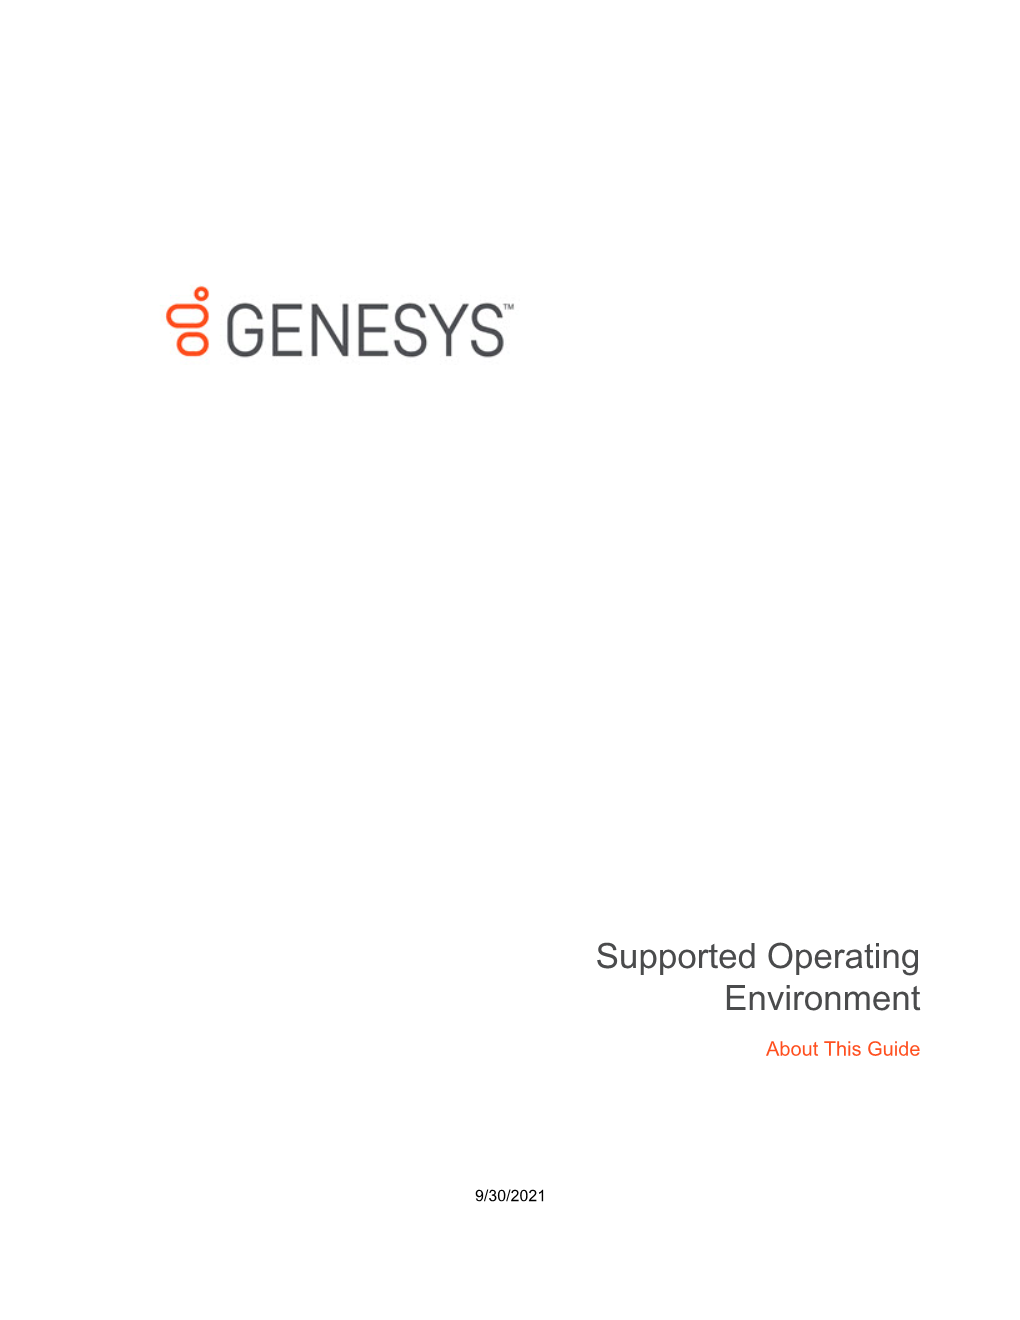 Supported Operating Environment